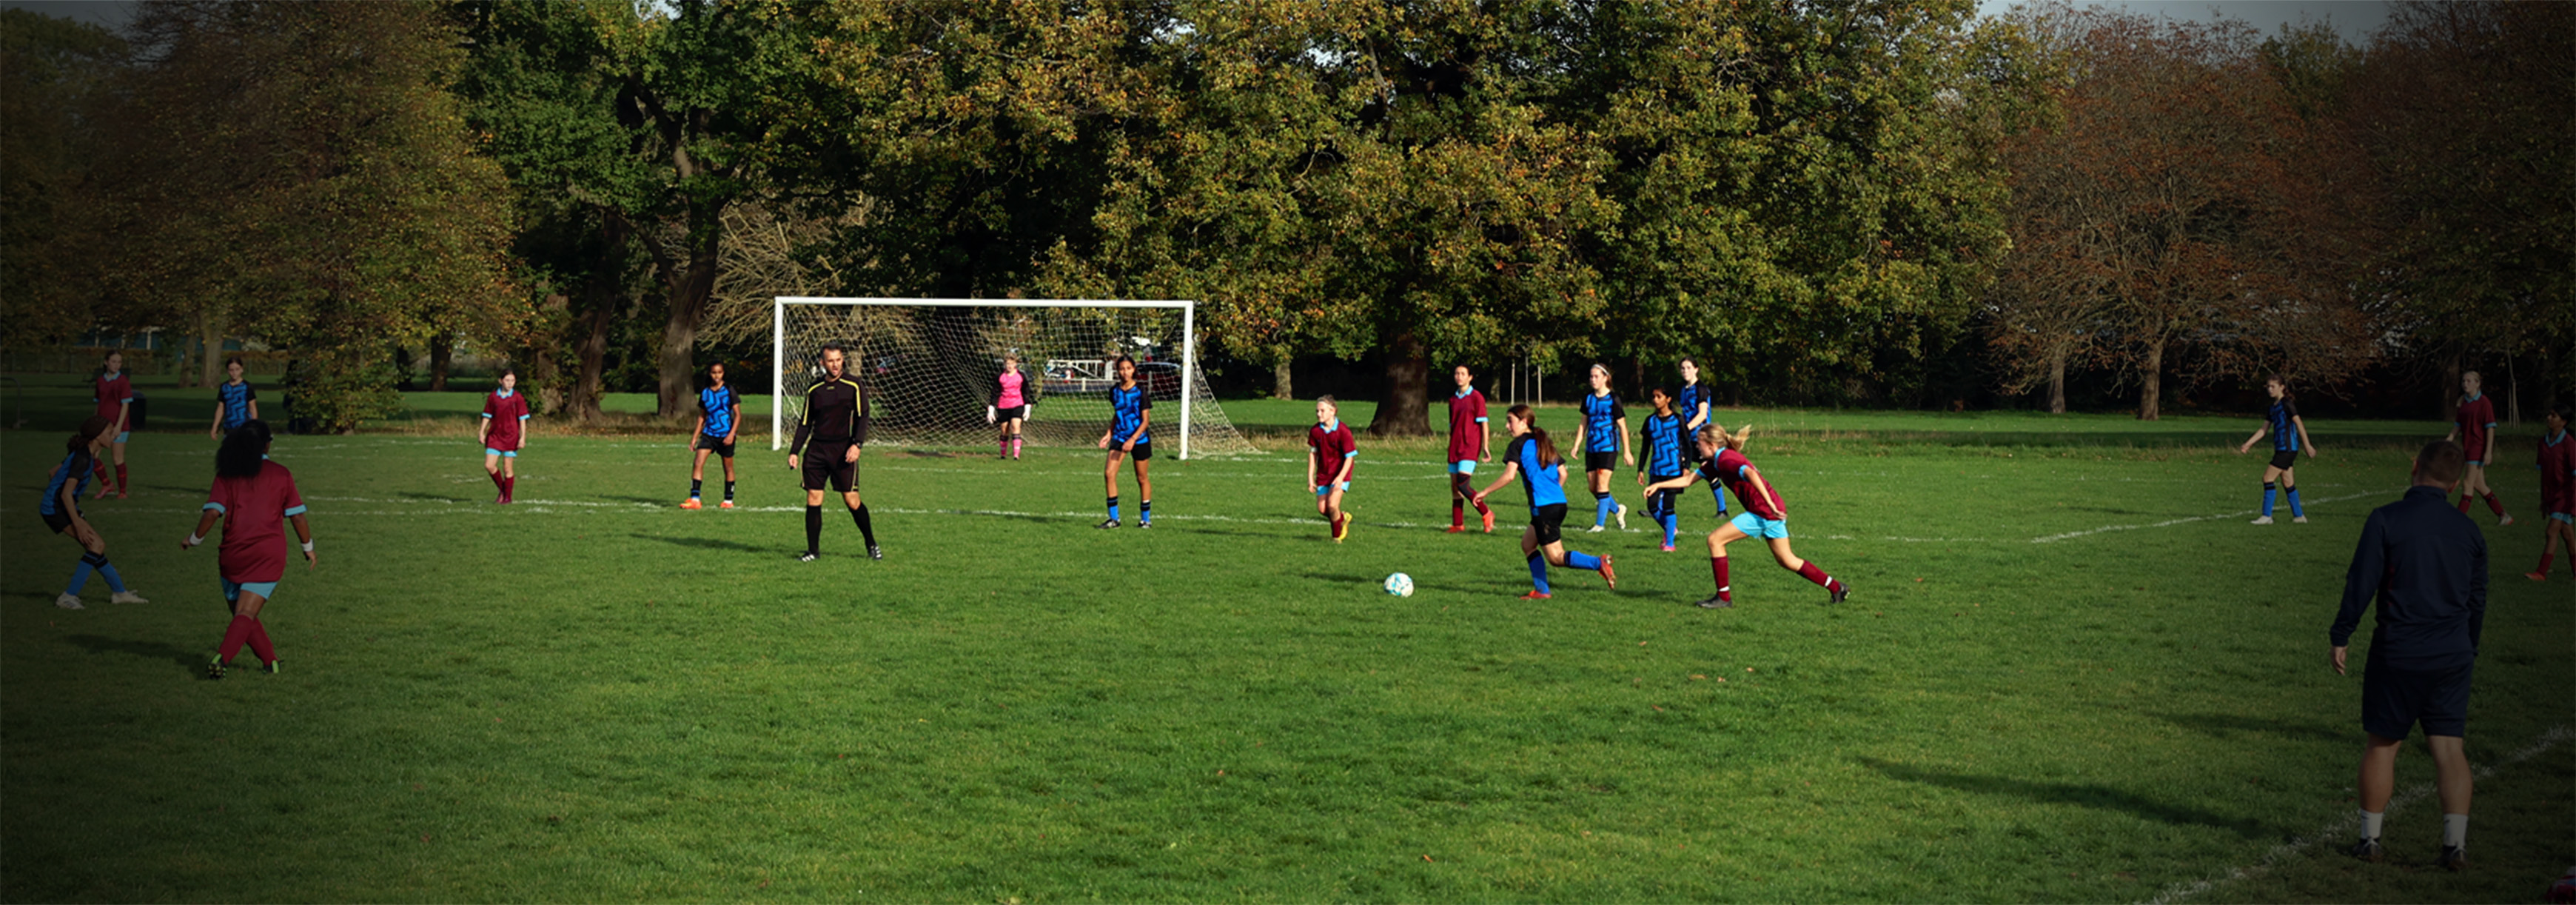 A wide-angle shot of a girls' grassroots football match. A player in a blue kit cuts inside with the ball with an opponent close behind her.